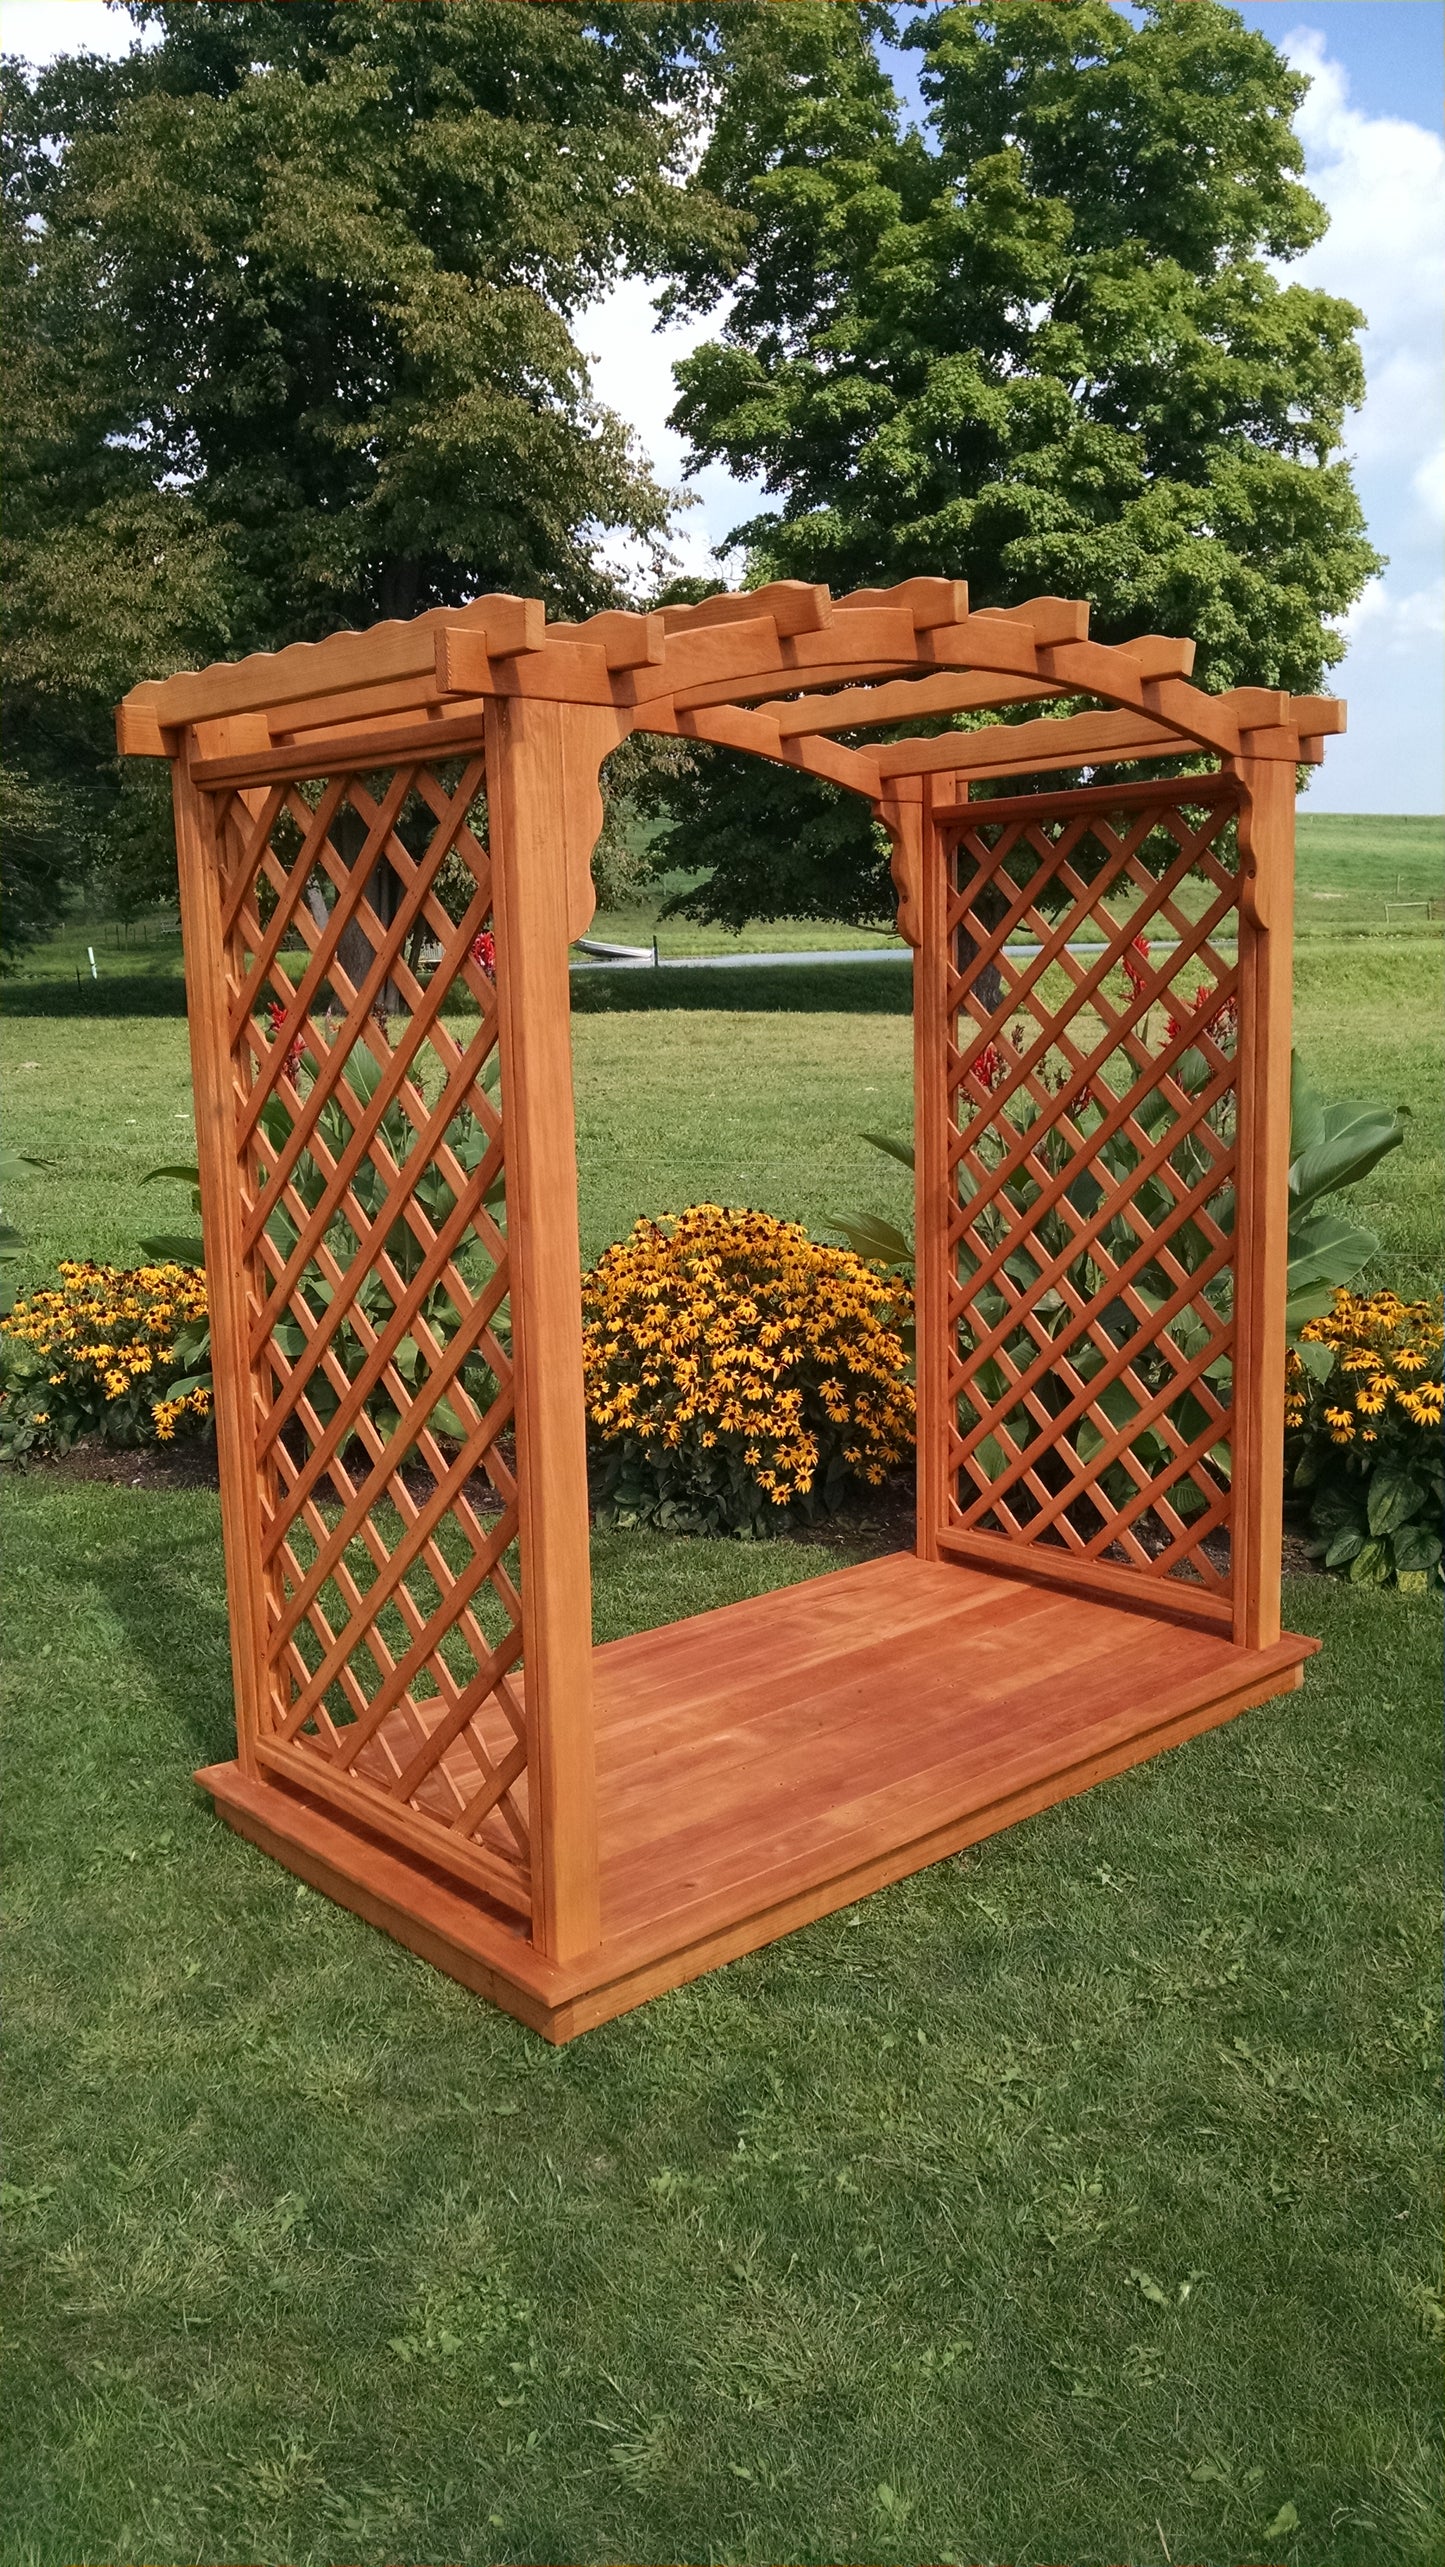 A&L FURNITURE CO. 6' Jamesport Pressure Treated Pine Arbor & Deck - LEAD TIME TO SHIP 10 BUSINESS DAYS